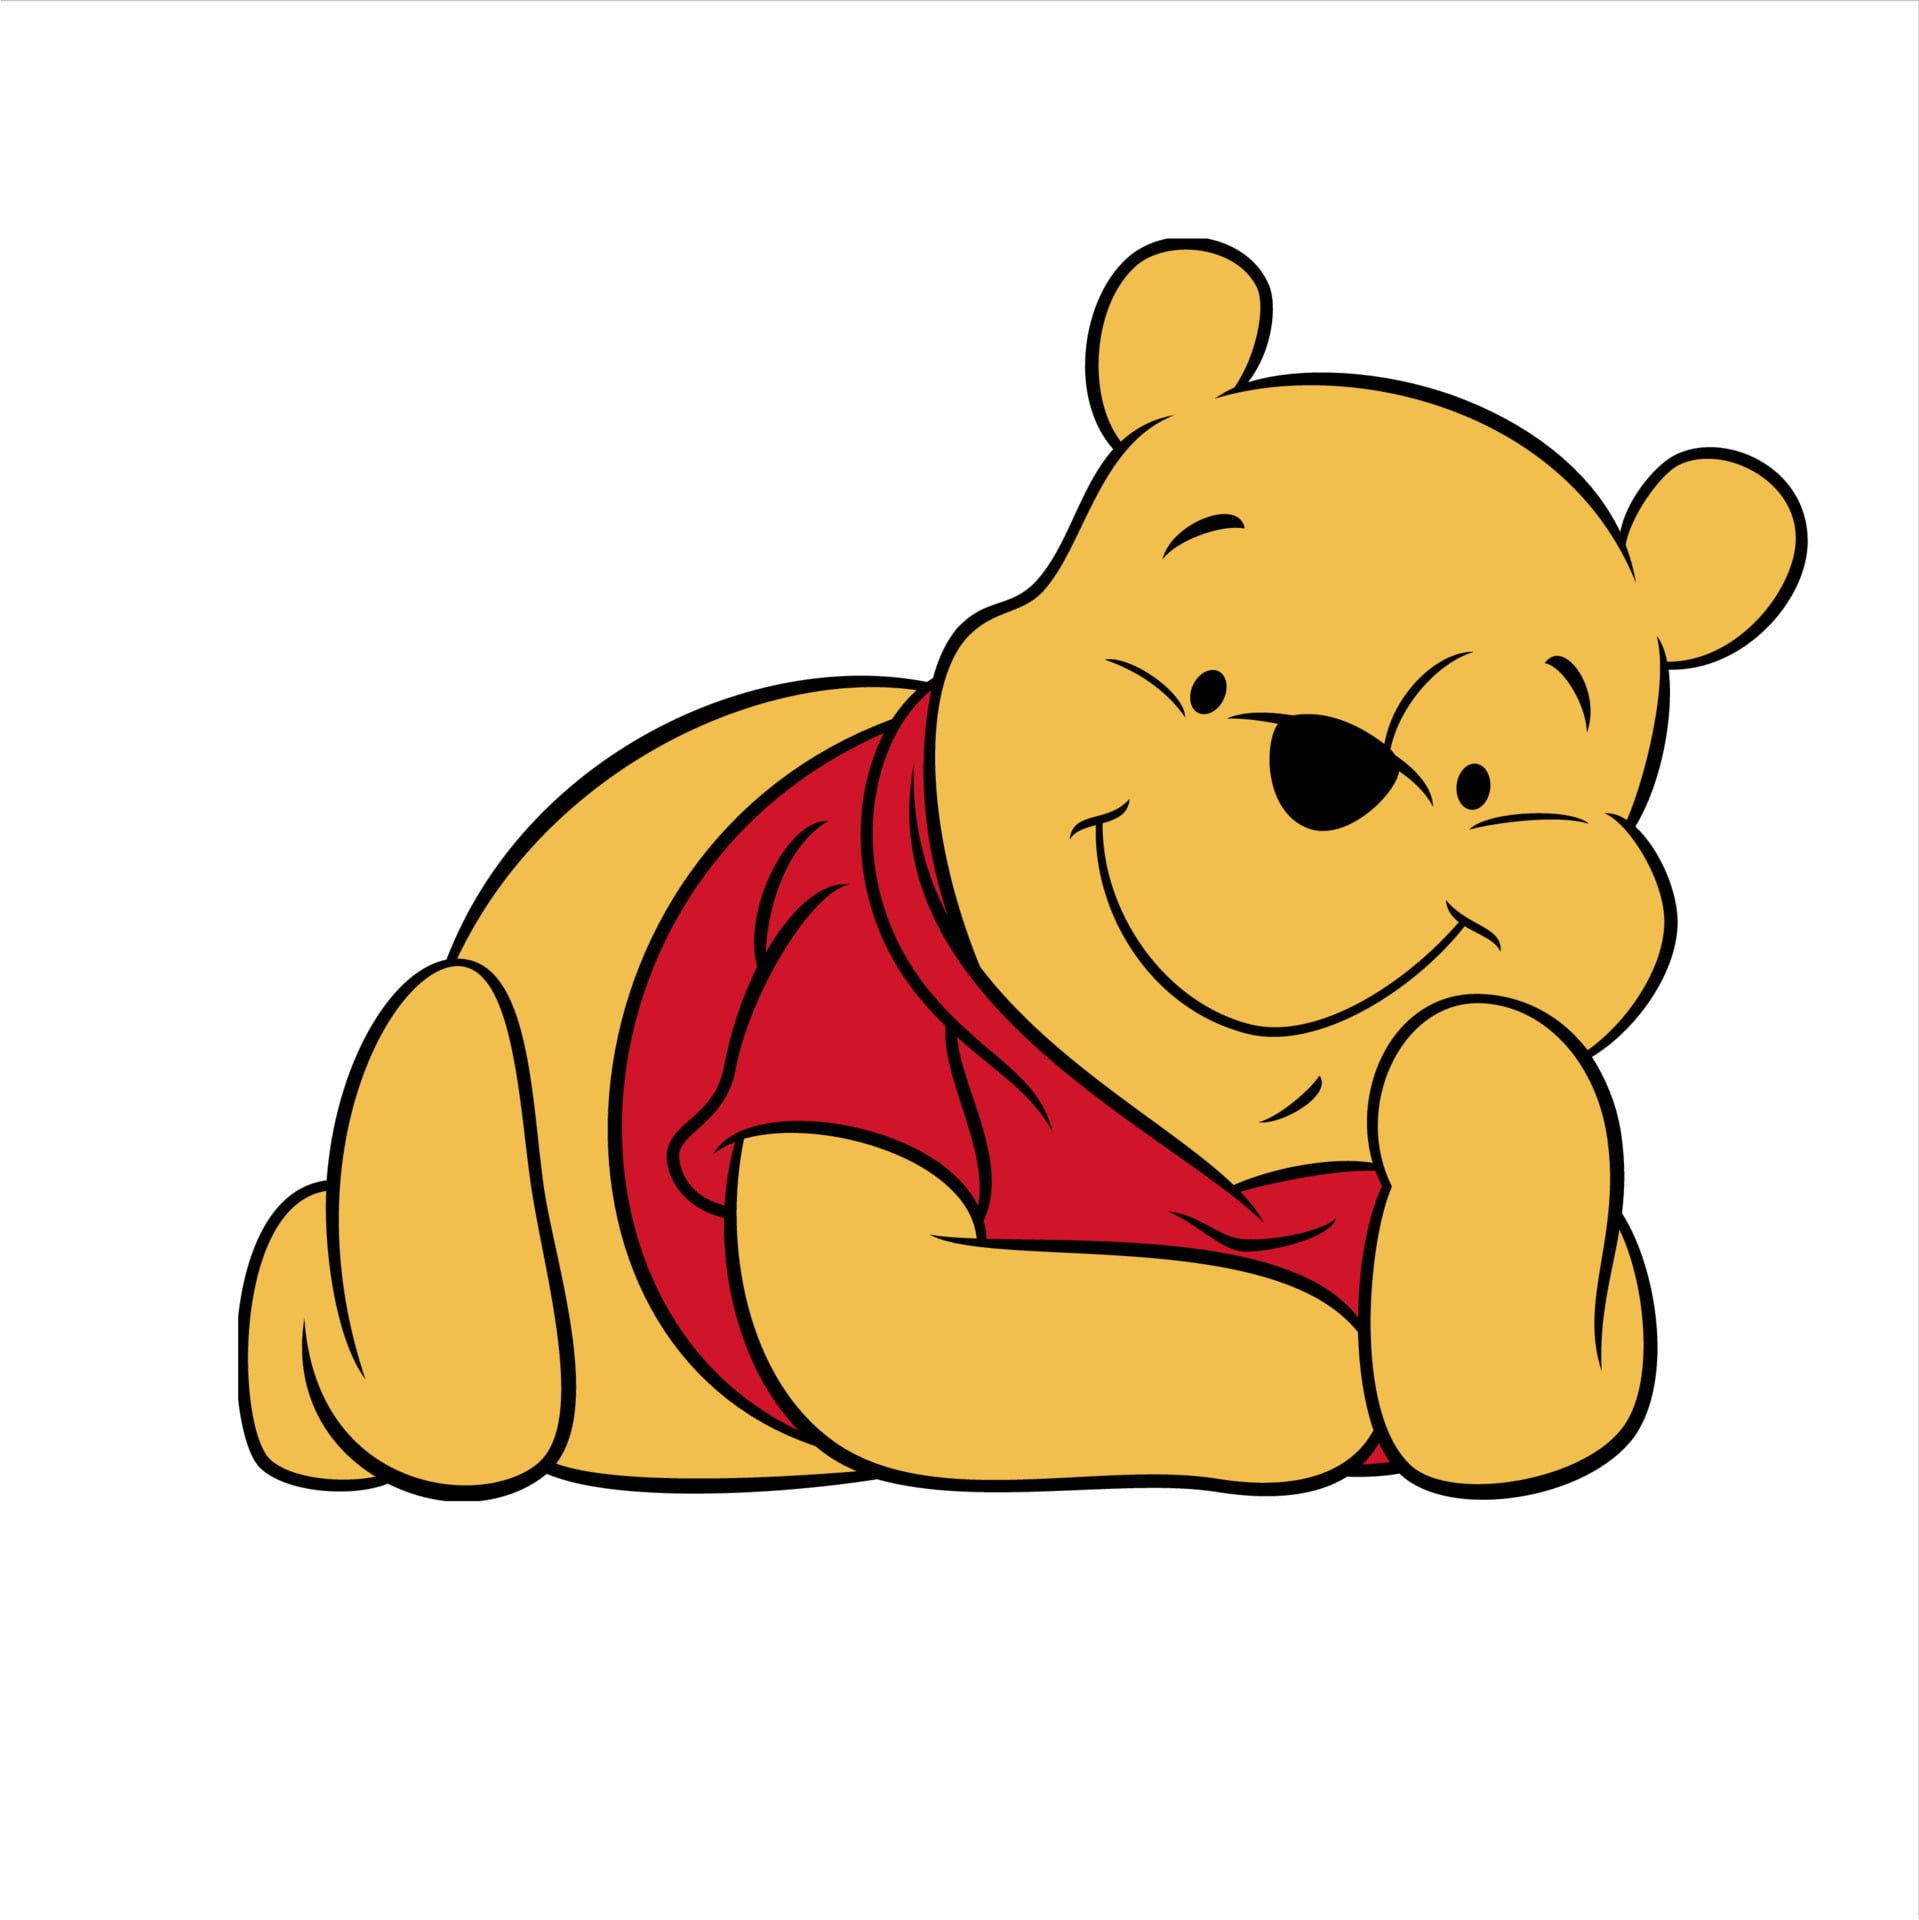 Winnie the Pooh The Concern of Obsessive Hunger